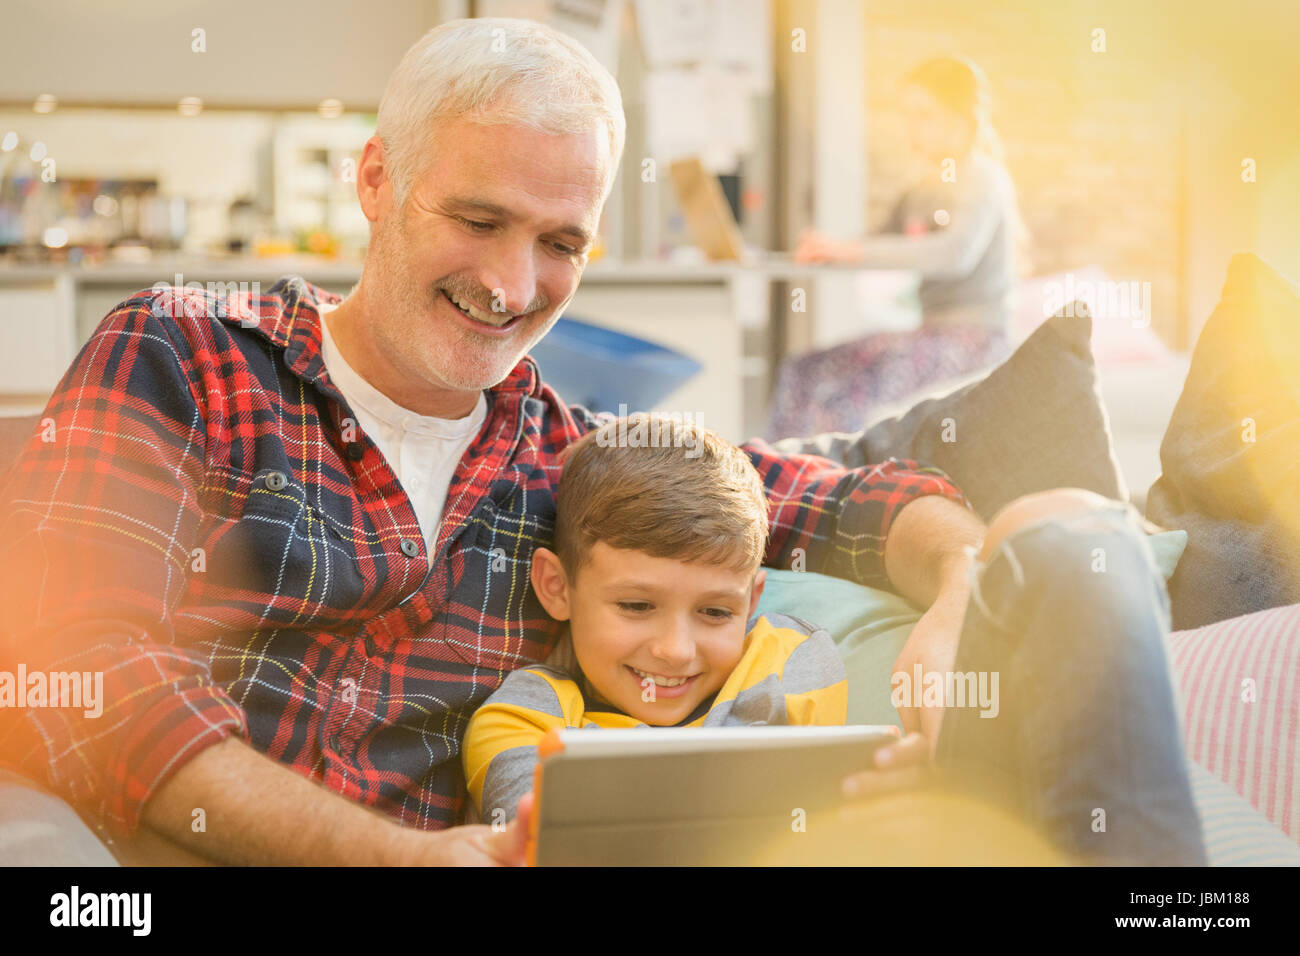 Father and son bonding, sharing digital tablet on sofa Stock Photo